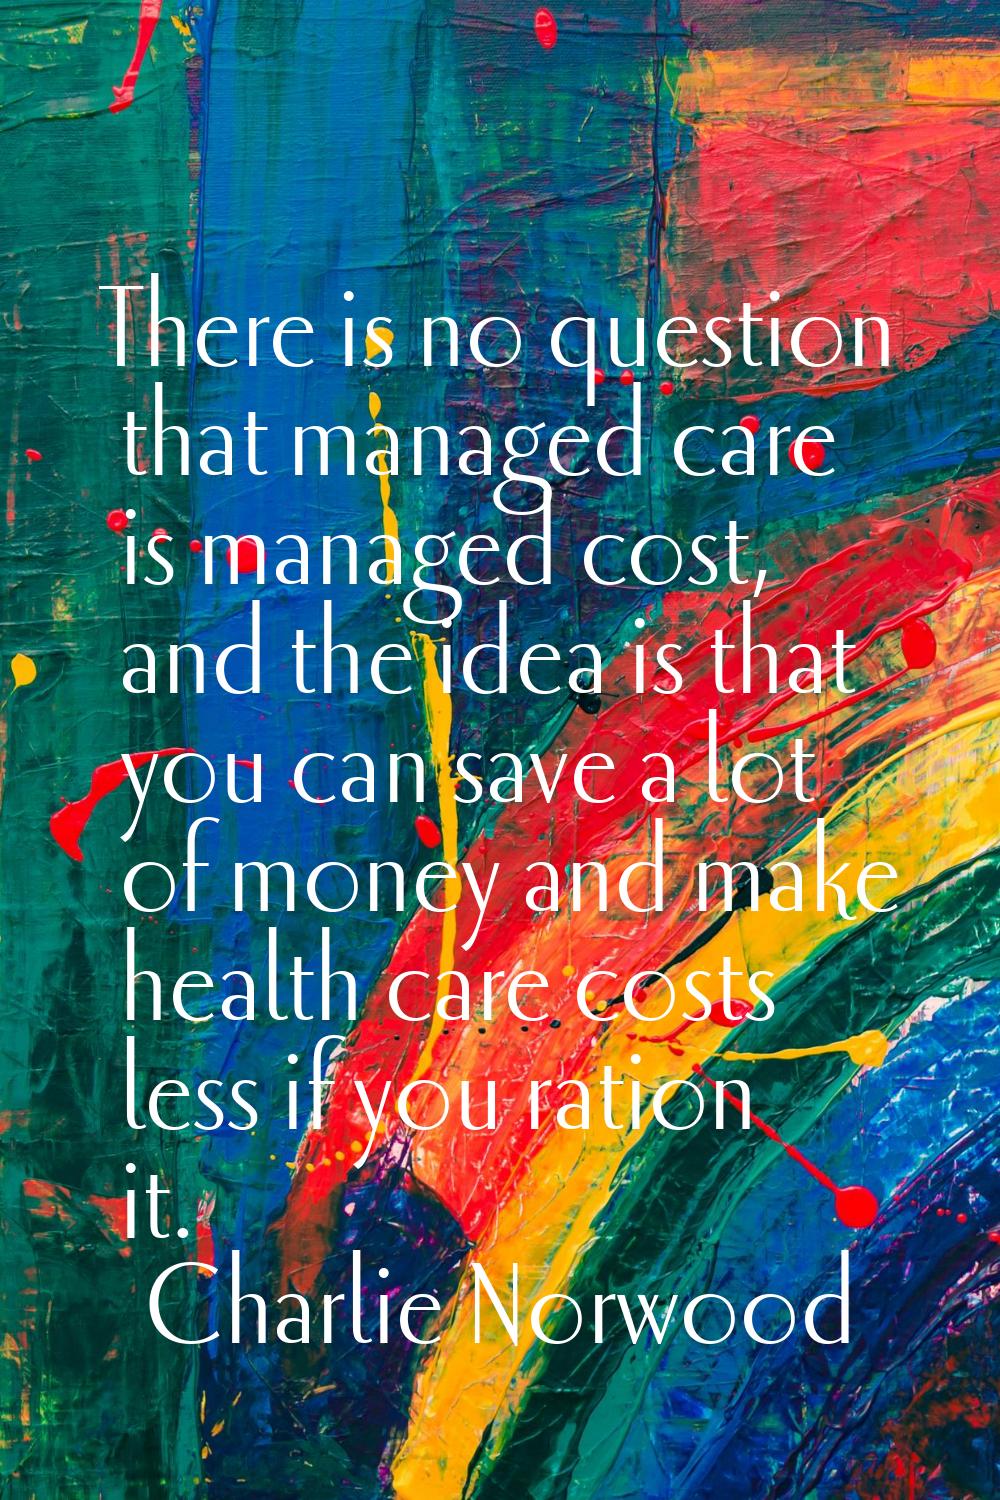 There is no question that managed care is managed cost, and the idea is that you can save a lot of 